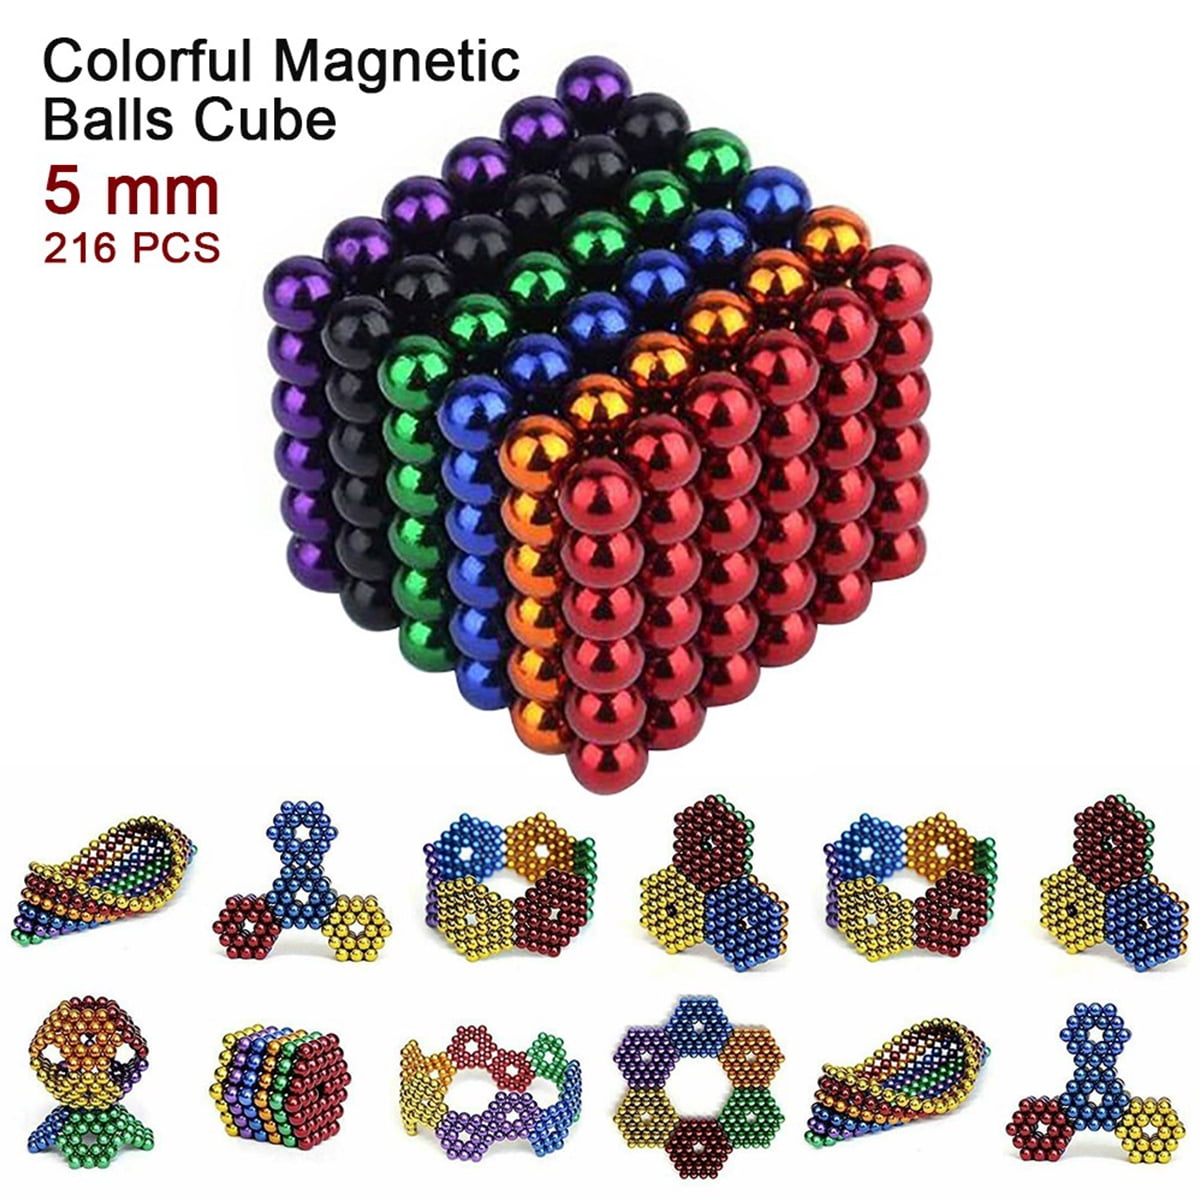 Magnet Fidget Toy and Stress Relief Toys for Adults Multicolor Building Cube Spheres Sensory 3D Puzzle Creative Relaxing Desk Hand Magnet Game Gadget Magnetic Balls 216pcs 5mm 